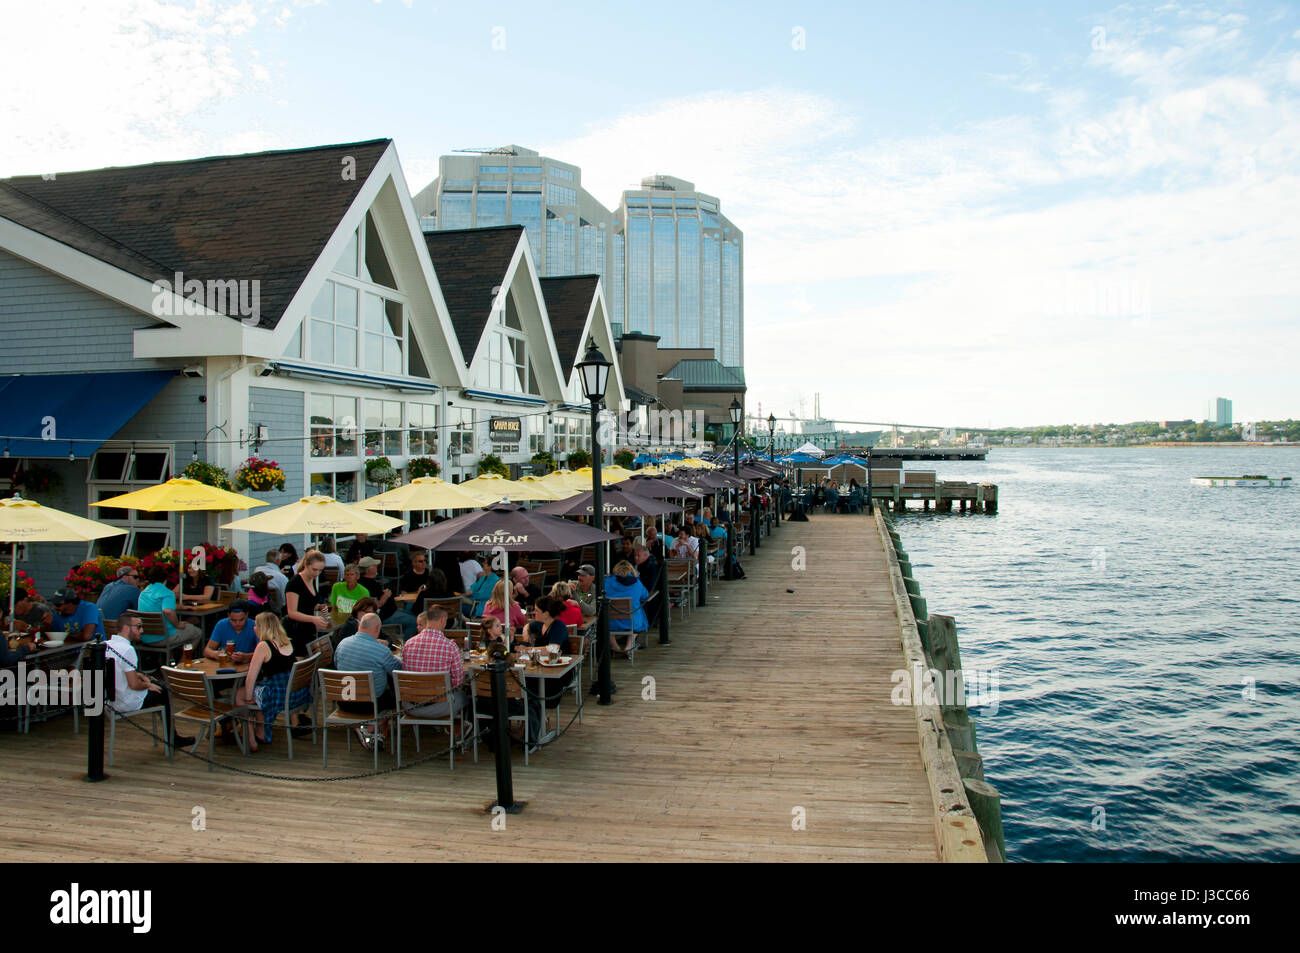 HALIFAX, CANADA - August 13, 2016:  The Halifax Waterfront Boardwalk is a public footpath and a tourist destination popular for its shops and restaura Stock Photo